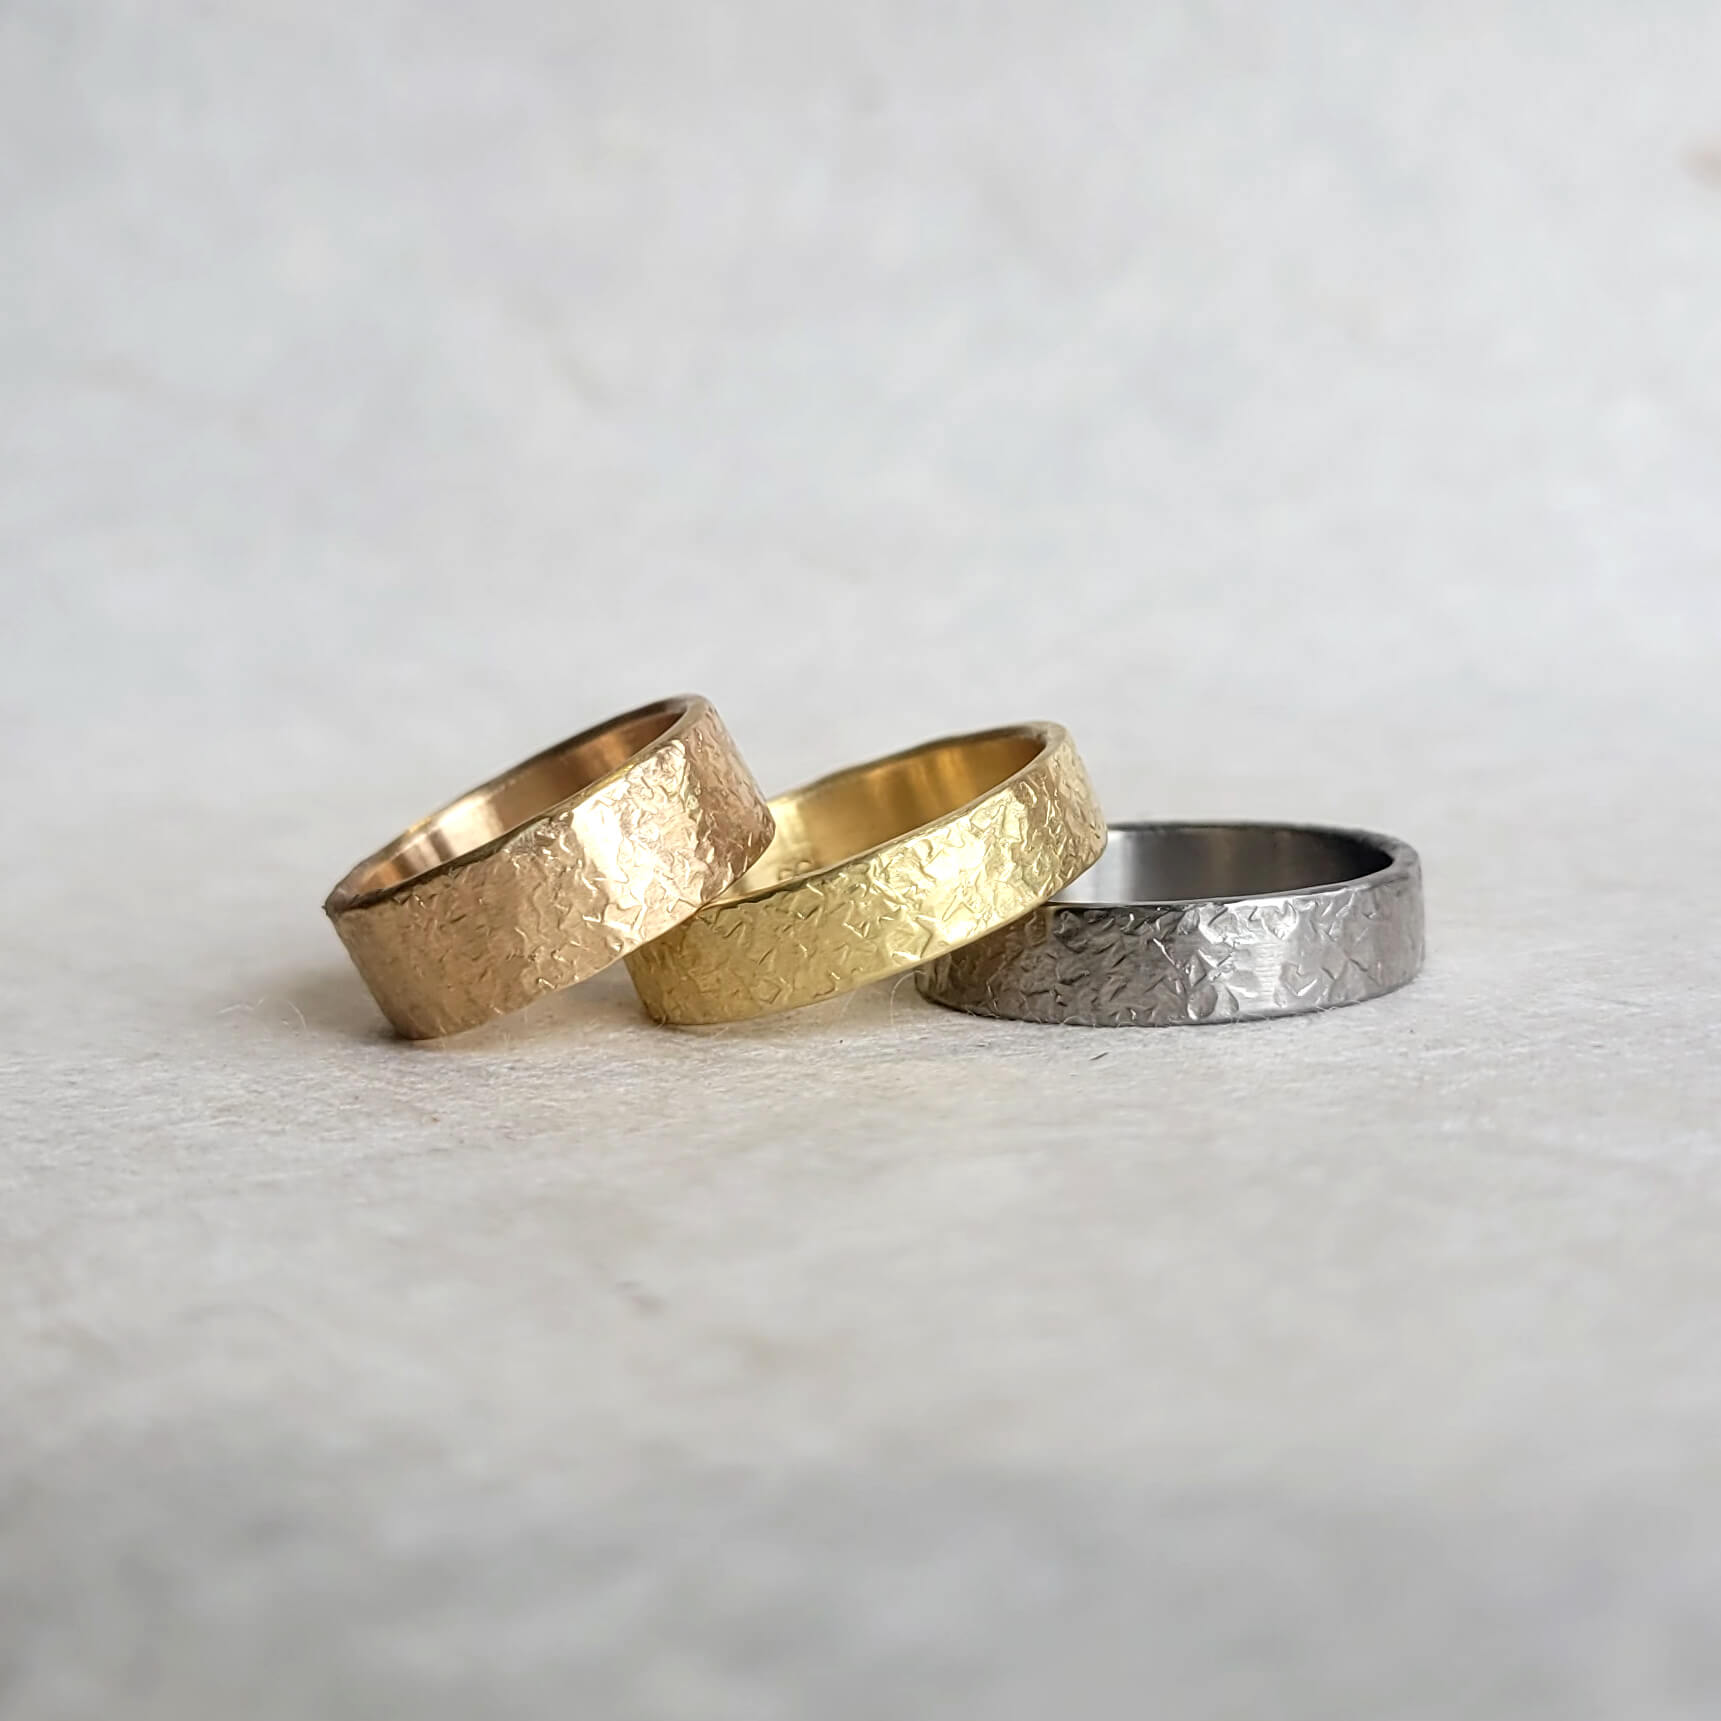 5mm Silk Hammered Band in Yellow Gold